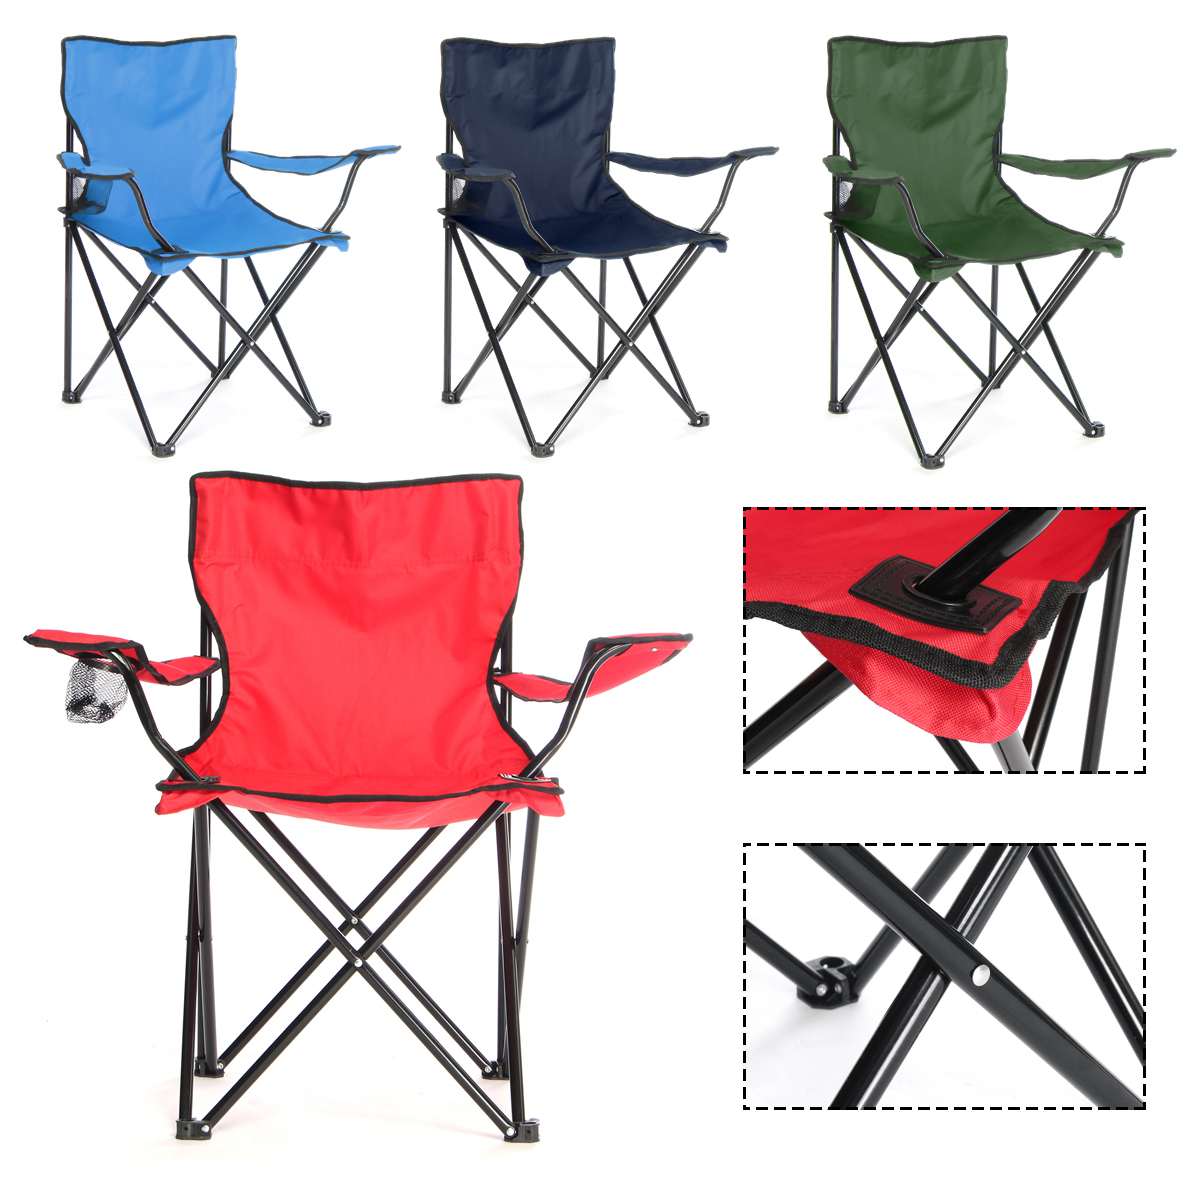 Light Folding Camping Fishing Chair Seat Portable Beach Garden Outdoor Camping Leisure Picnic Beach Chair Tool Blue Green Red